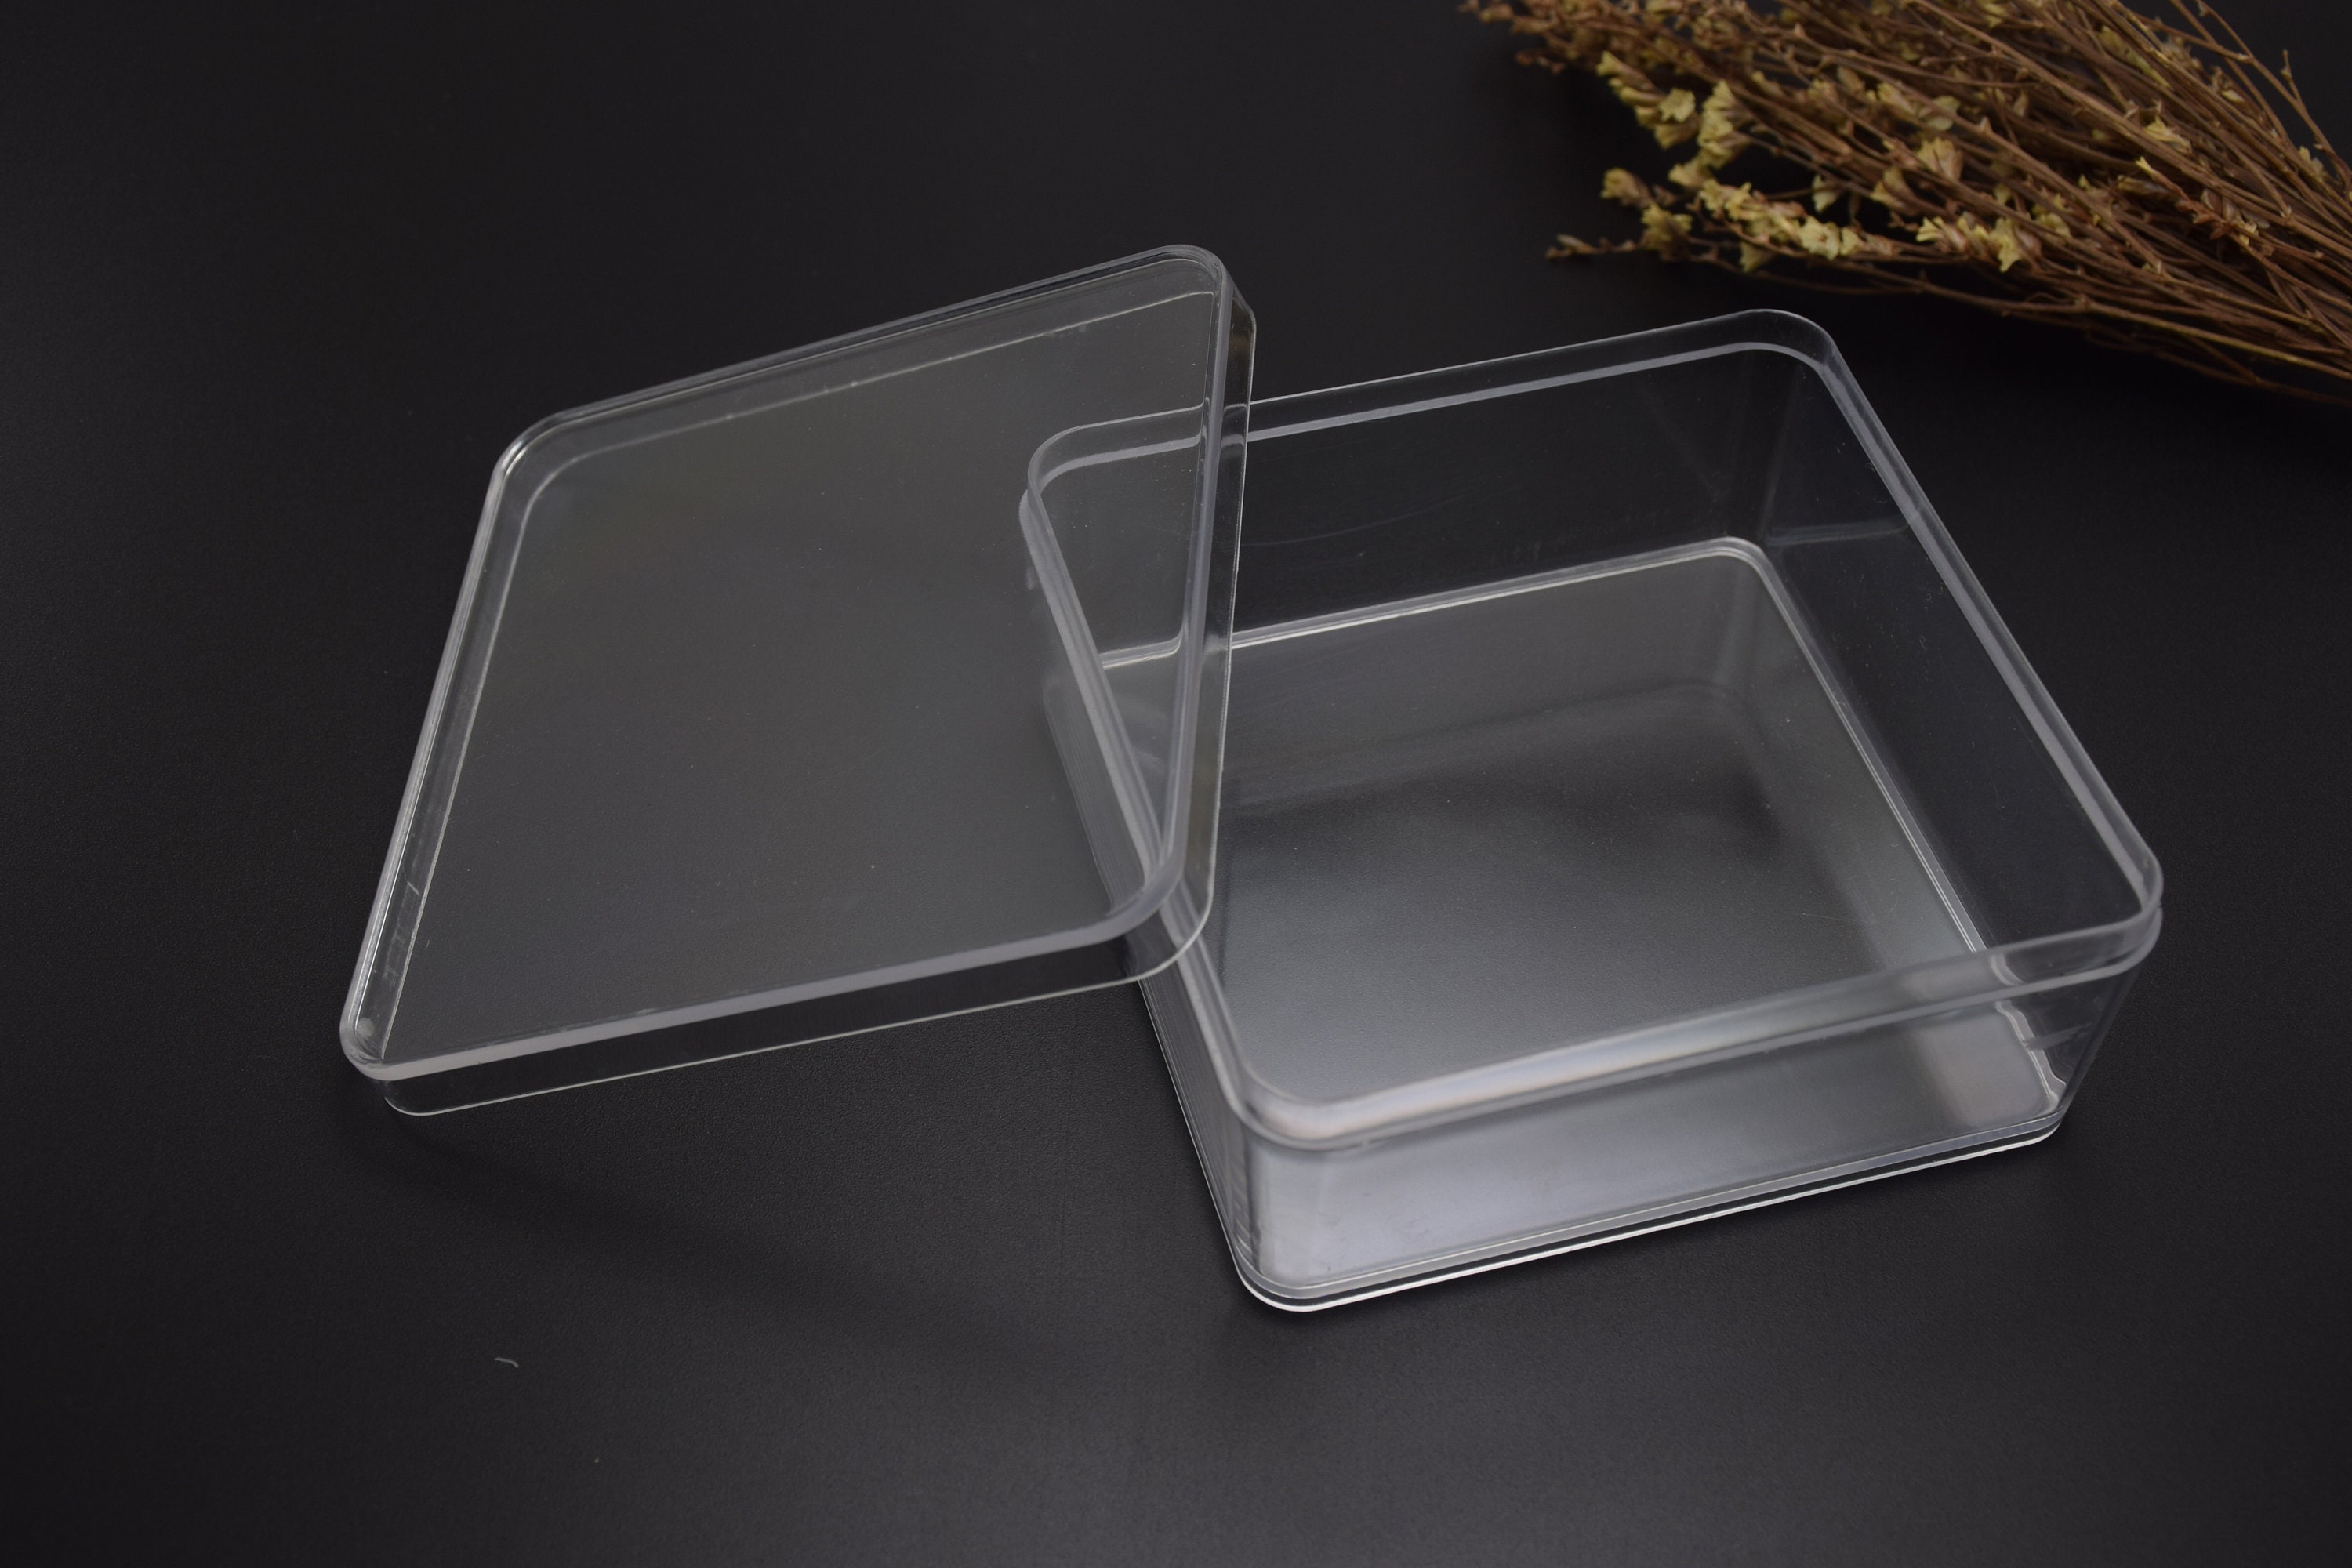 2PCS 70mmx70mmx50mm Square Clear Plastic Boxes,boxes With Lid,organizer  Storage Boxes,clear Display Cases,transparent Container Boxes AB89 